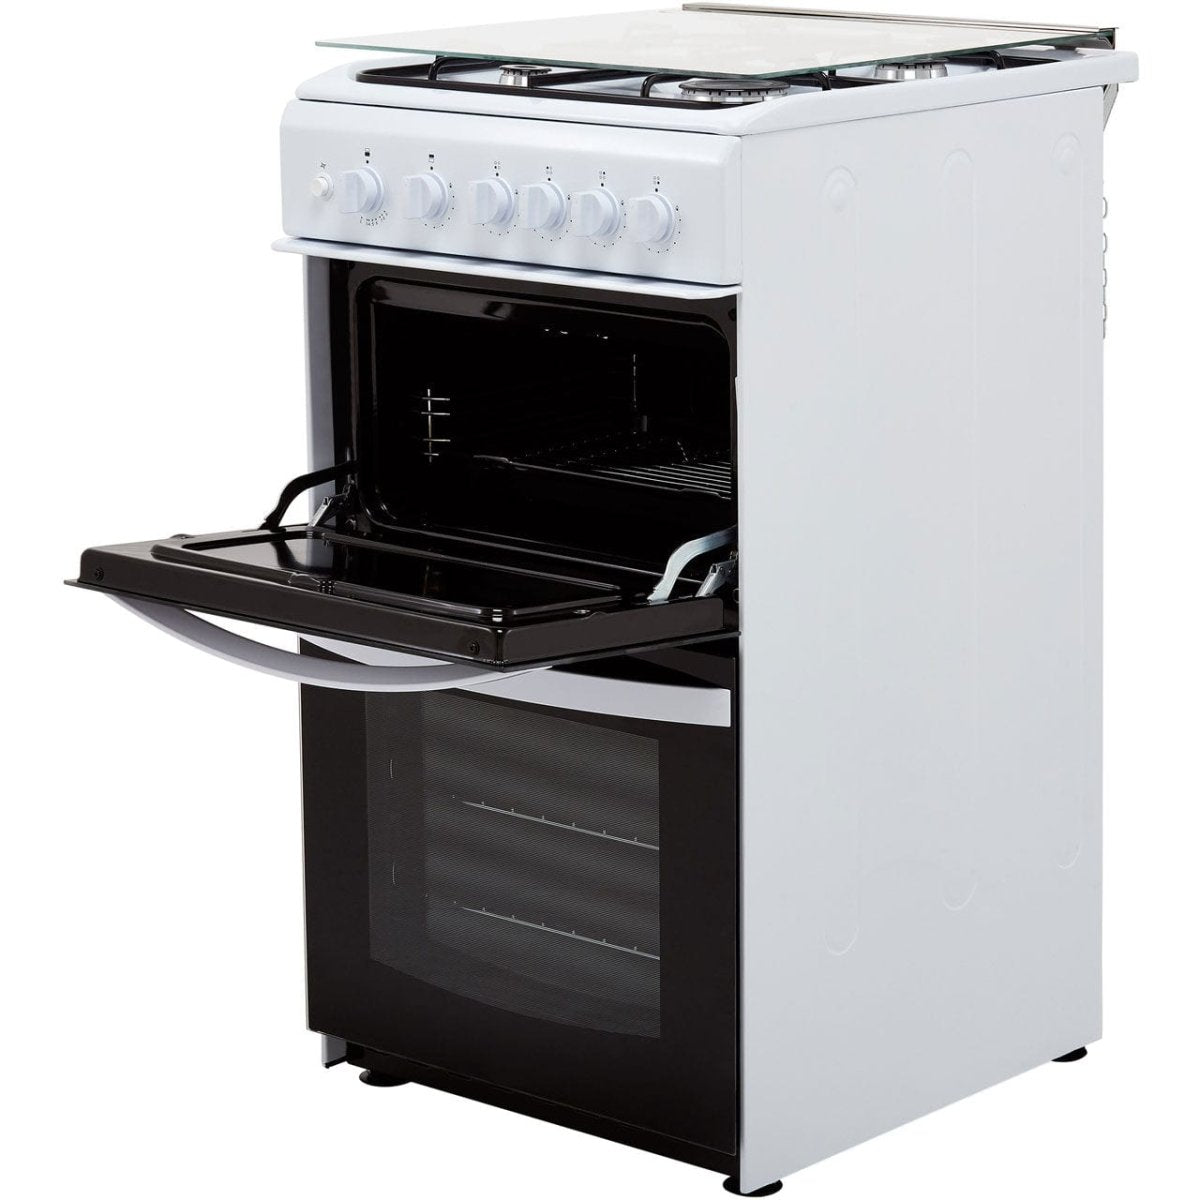 Indesit ID5G00KMWL 50cm Double Cavity Gas Cooker With Lid - White | Atlantic Electrics